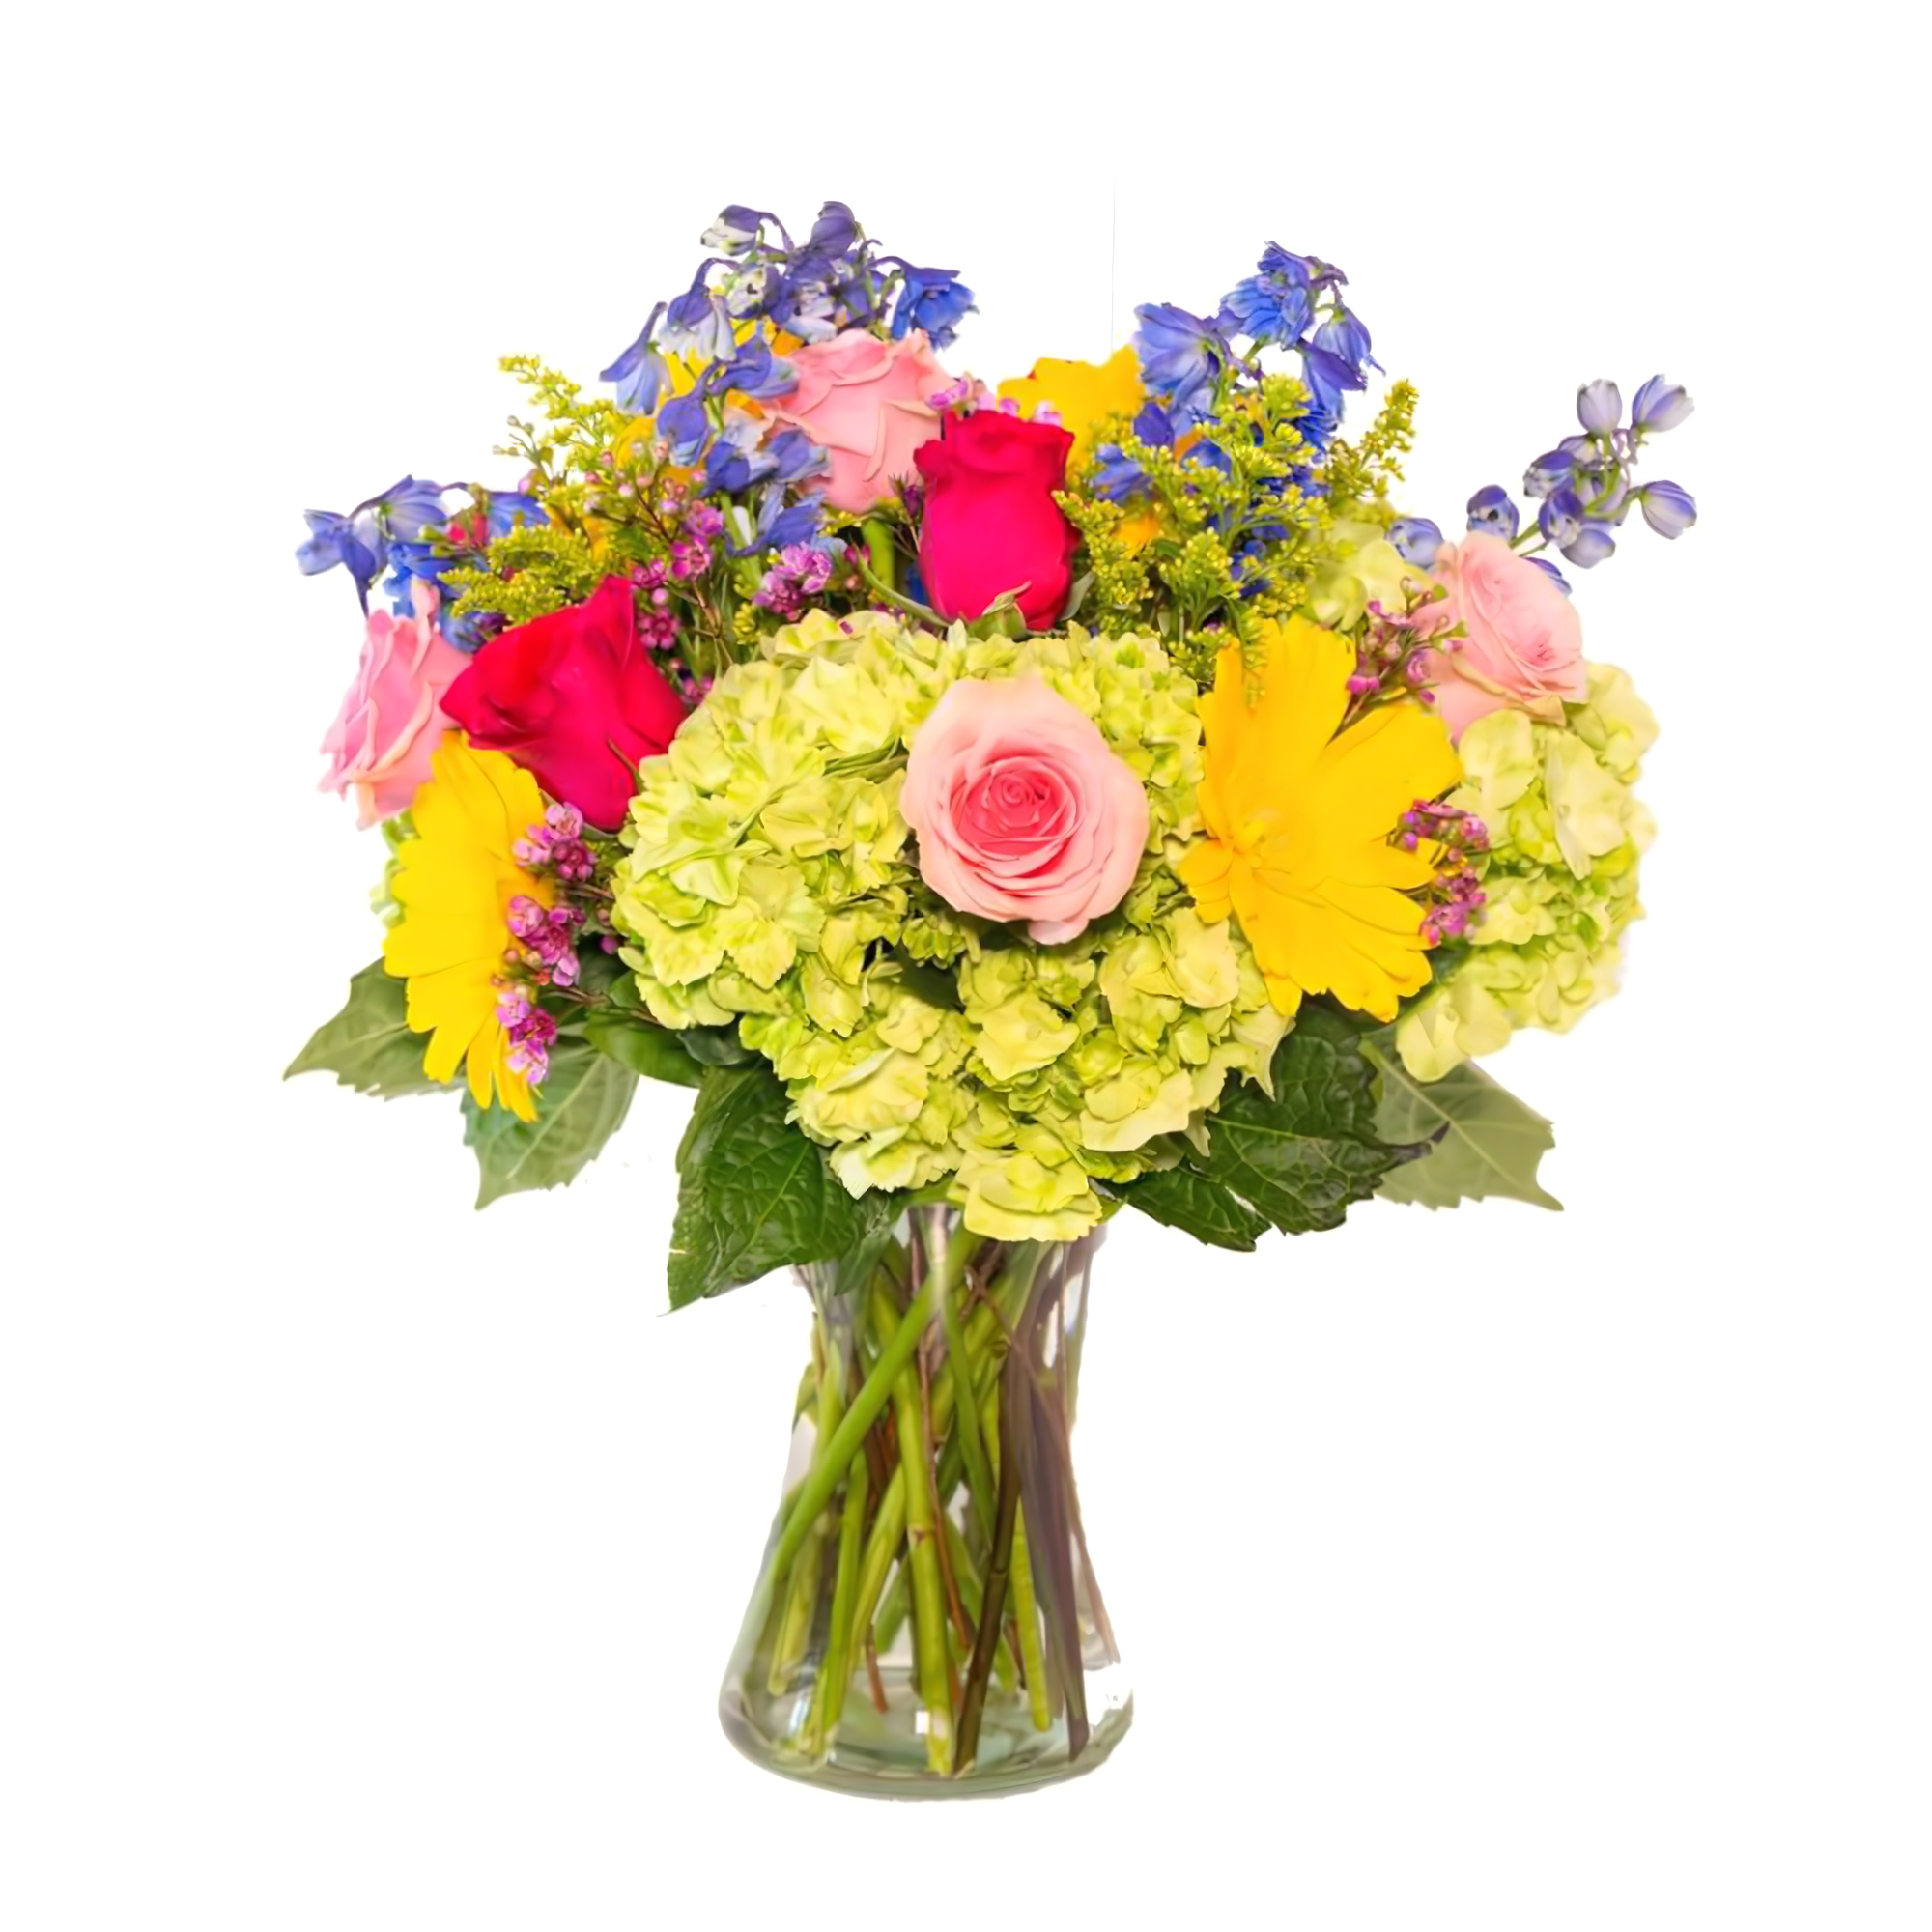 NYC Flower Delivery - French Country Garden Bouquet - Birthdays